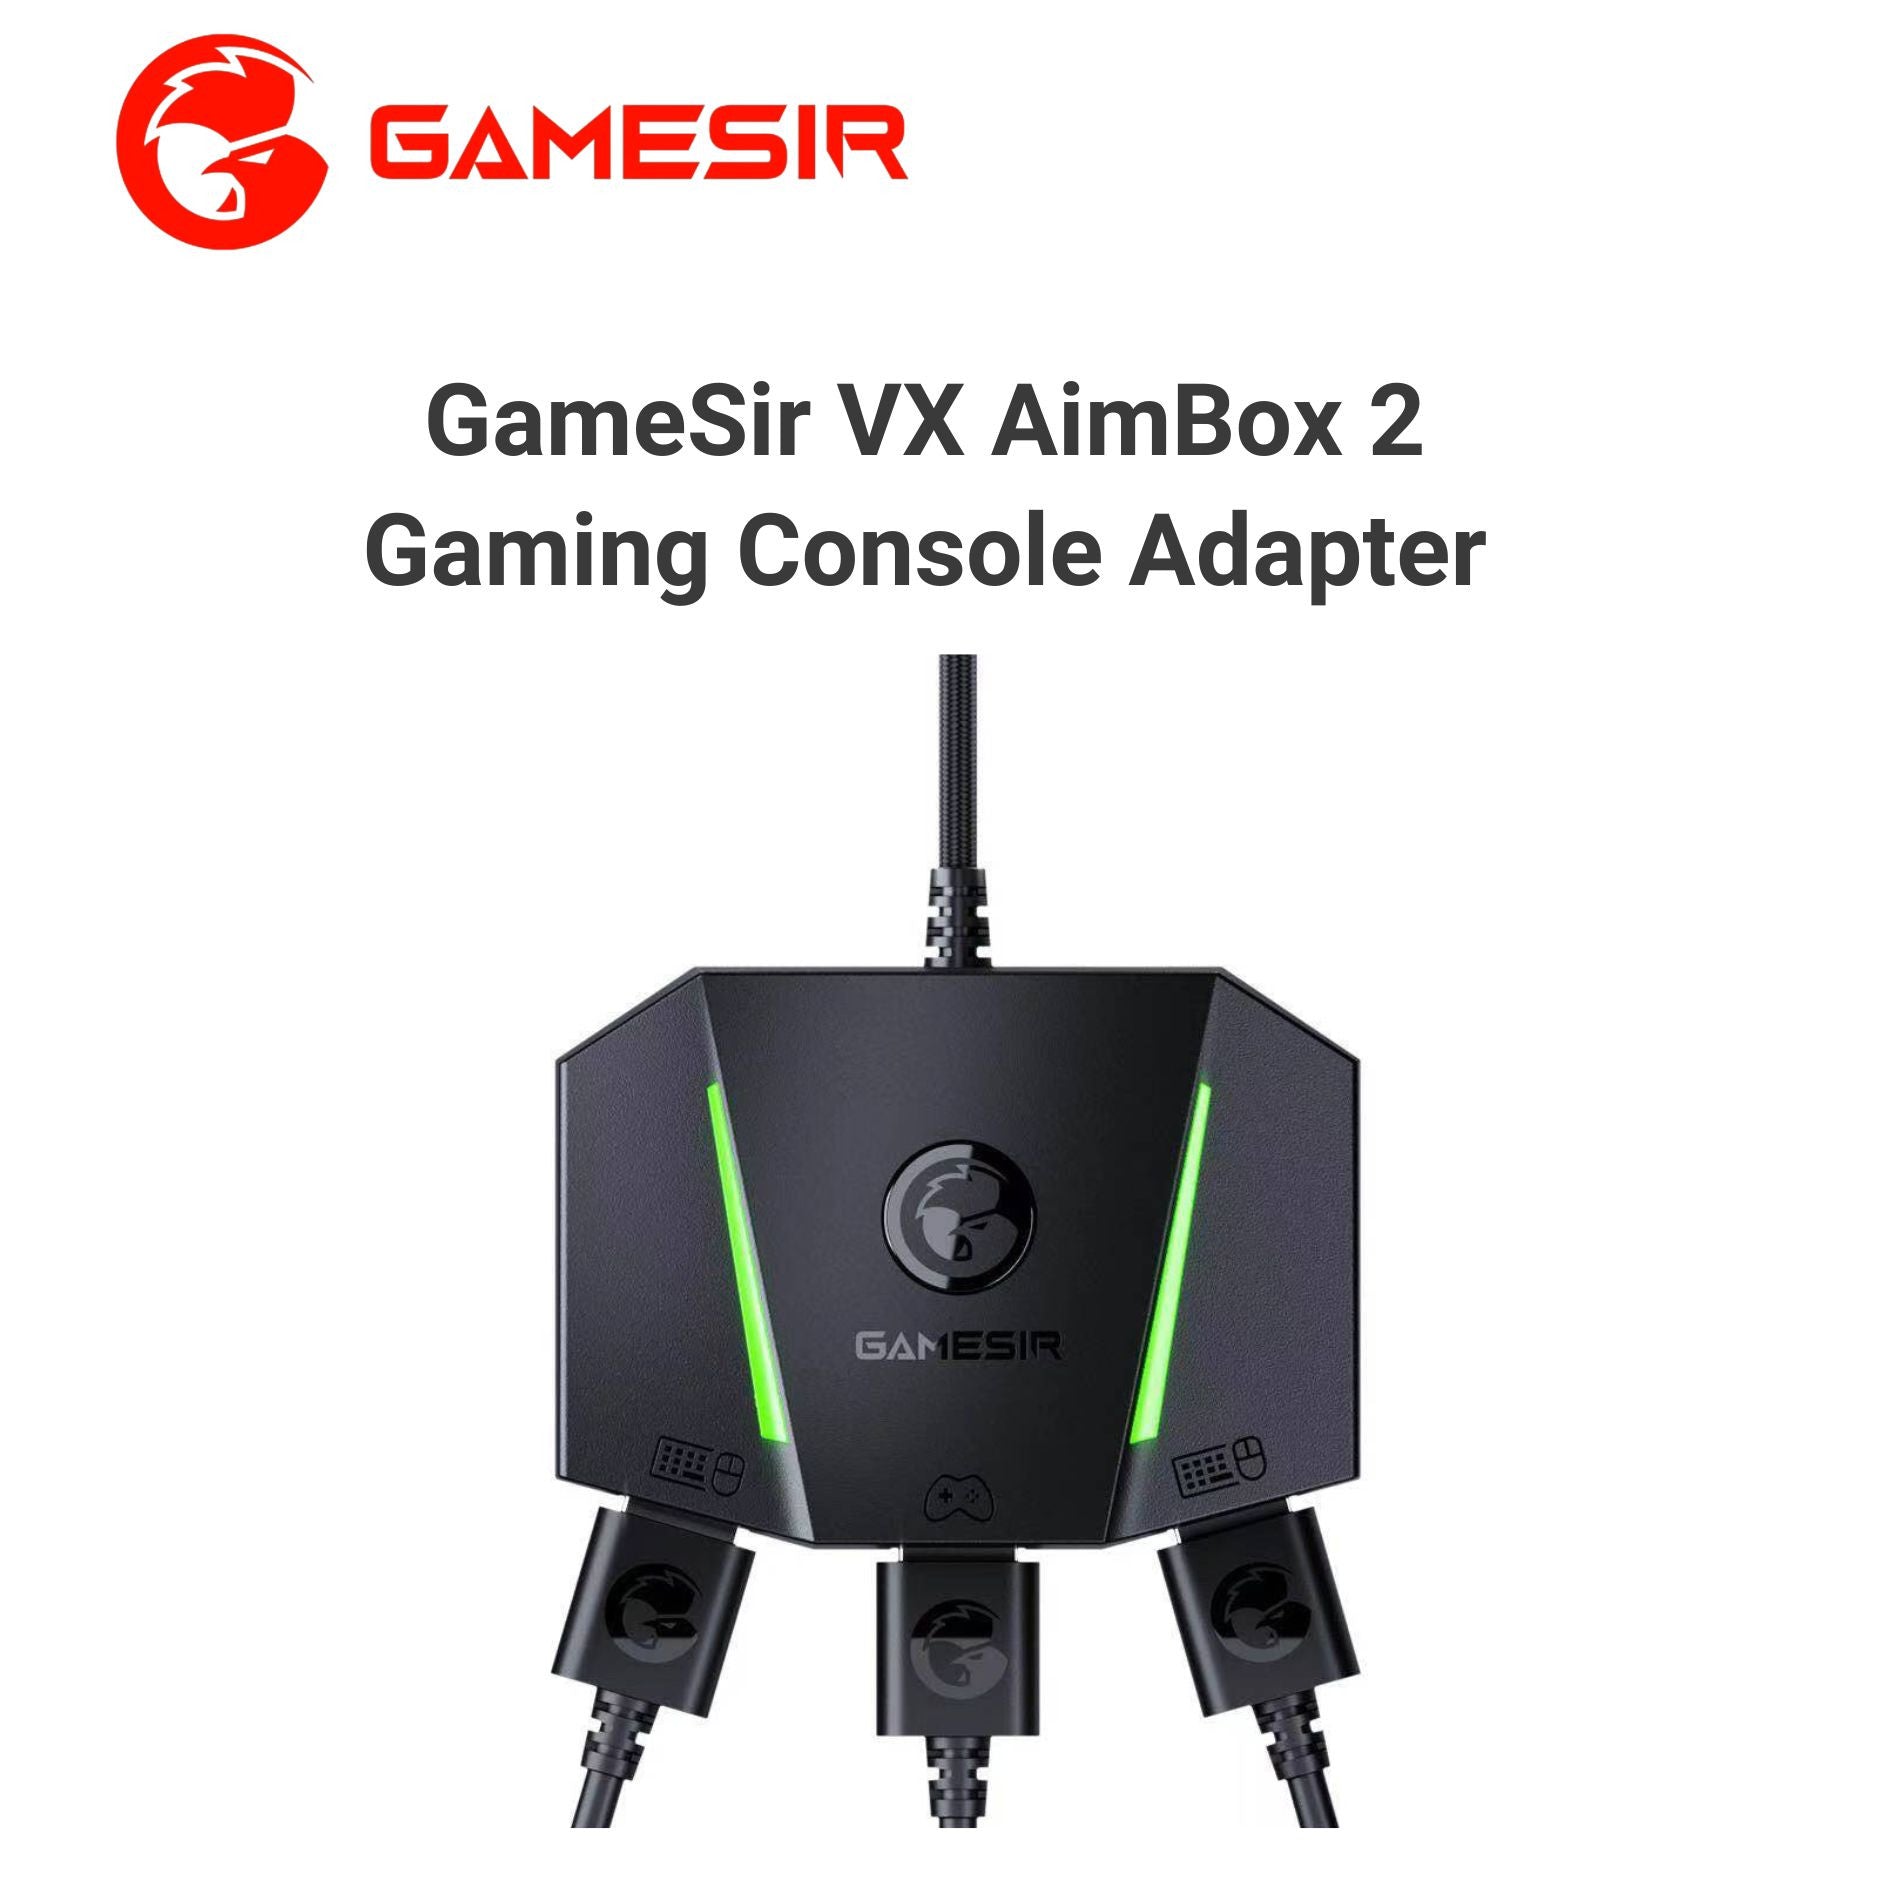  GameSir VX Gaming Keyboard and Mouse for Xbox One/Xbox Series  X/S, PS4, PS3, Nintendo Switch PC, Wireless Game Keypad and Mouse Adapter  for Computer and Consoles : Video Games